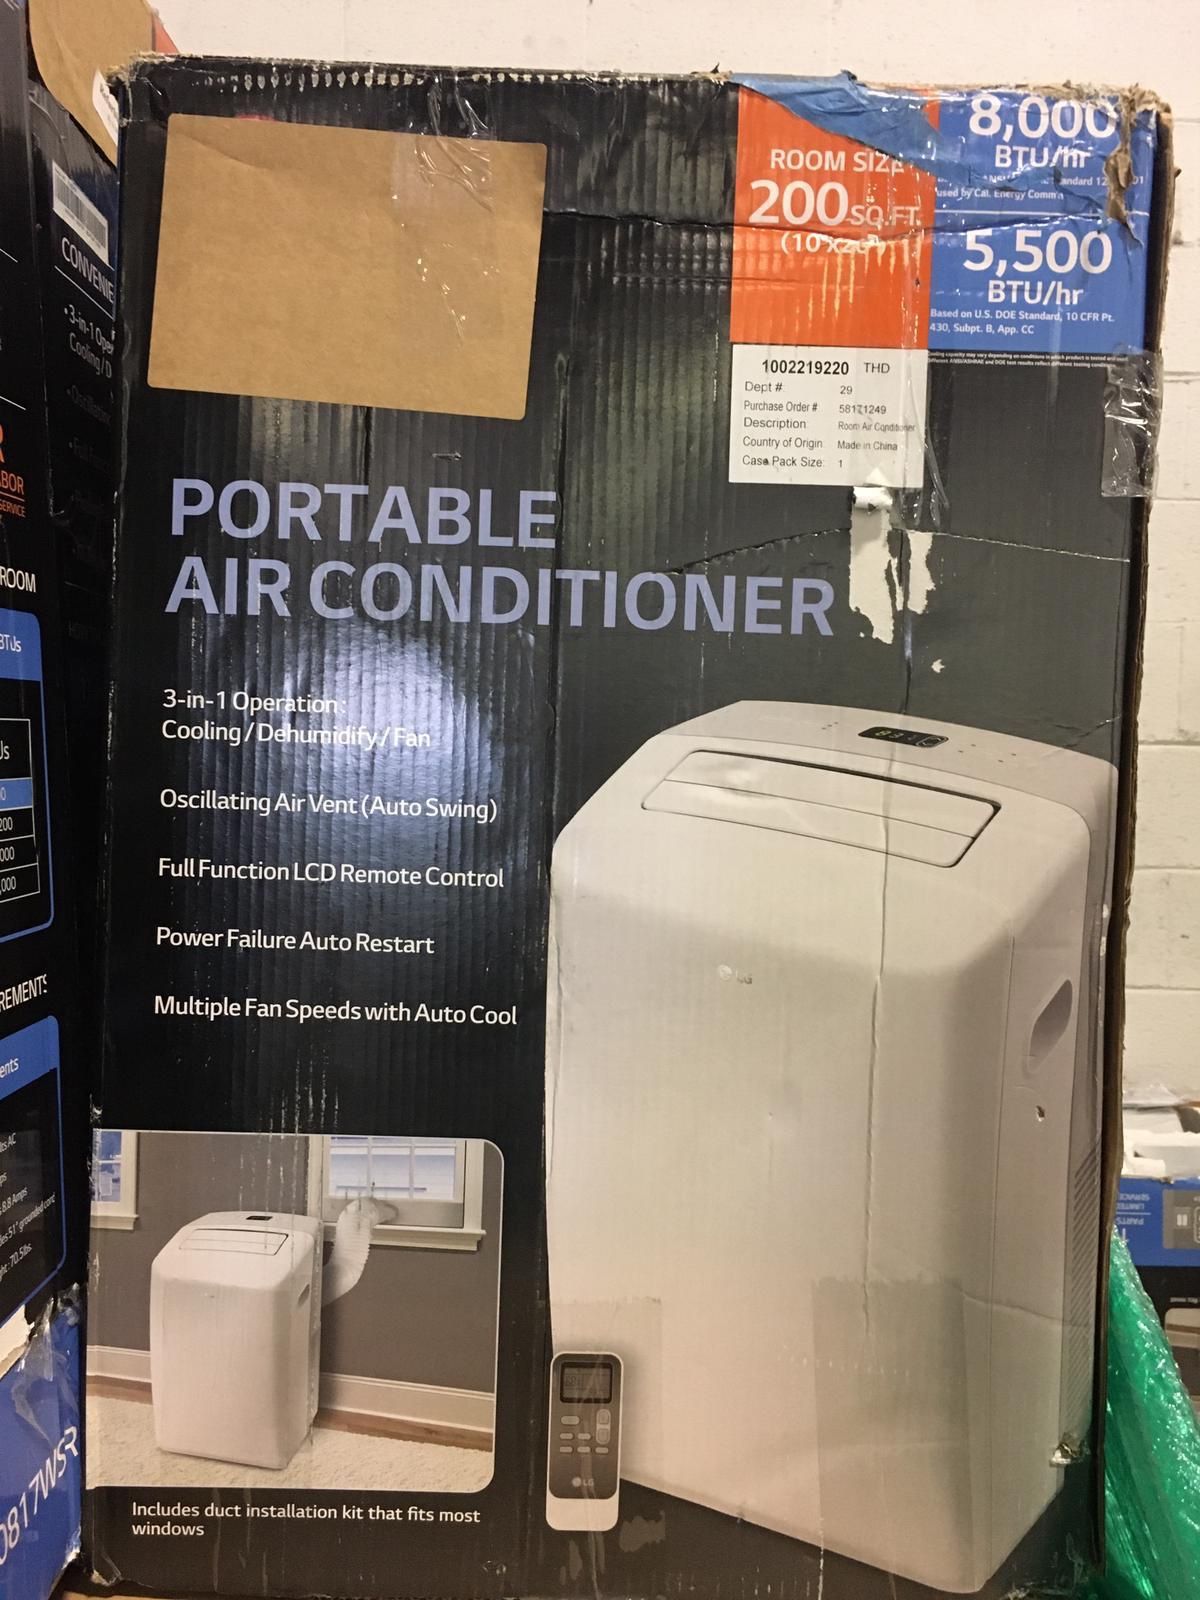 😍LG AIR CONDITIONERS FROM $150 up FIRST COME FIRST SERVE !!! 🤩🤩🤩